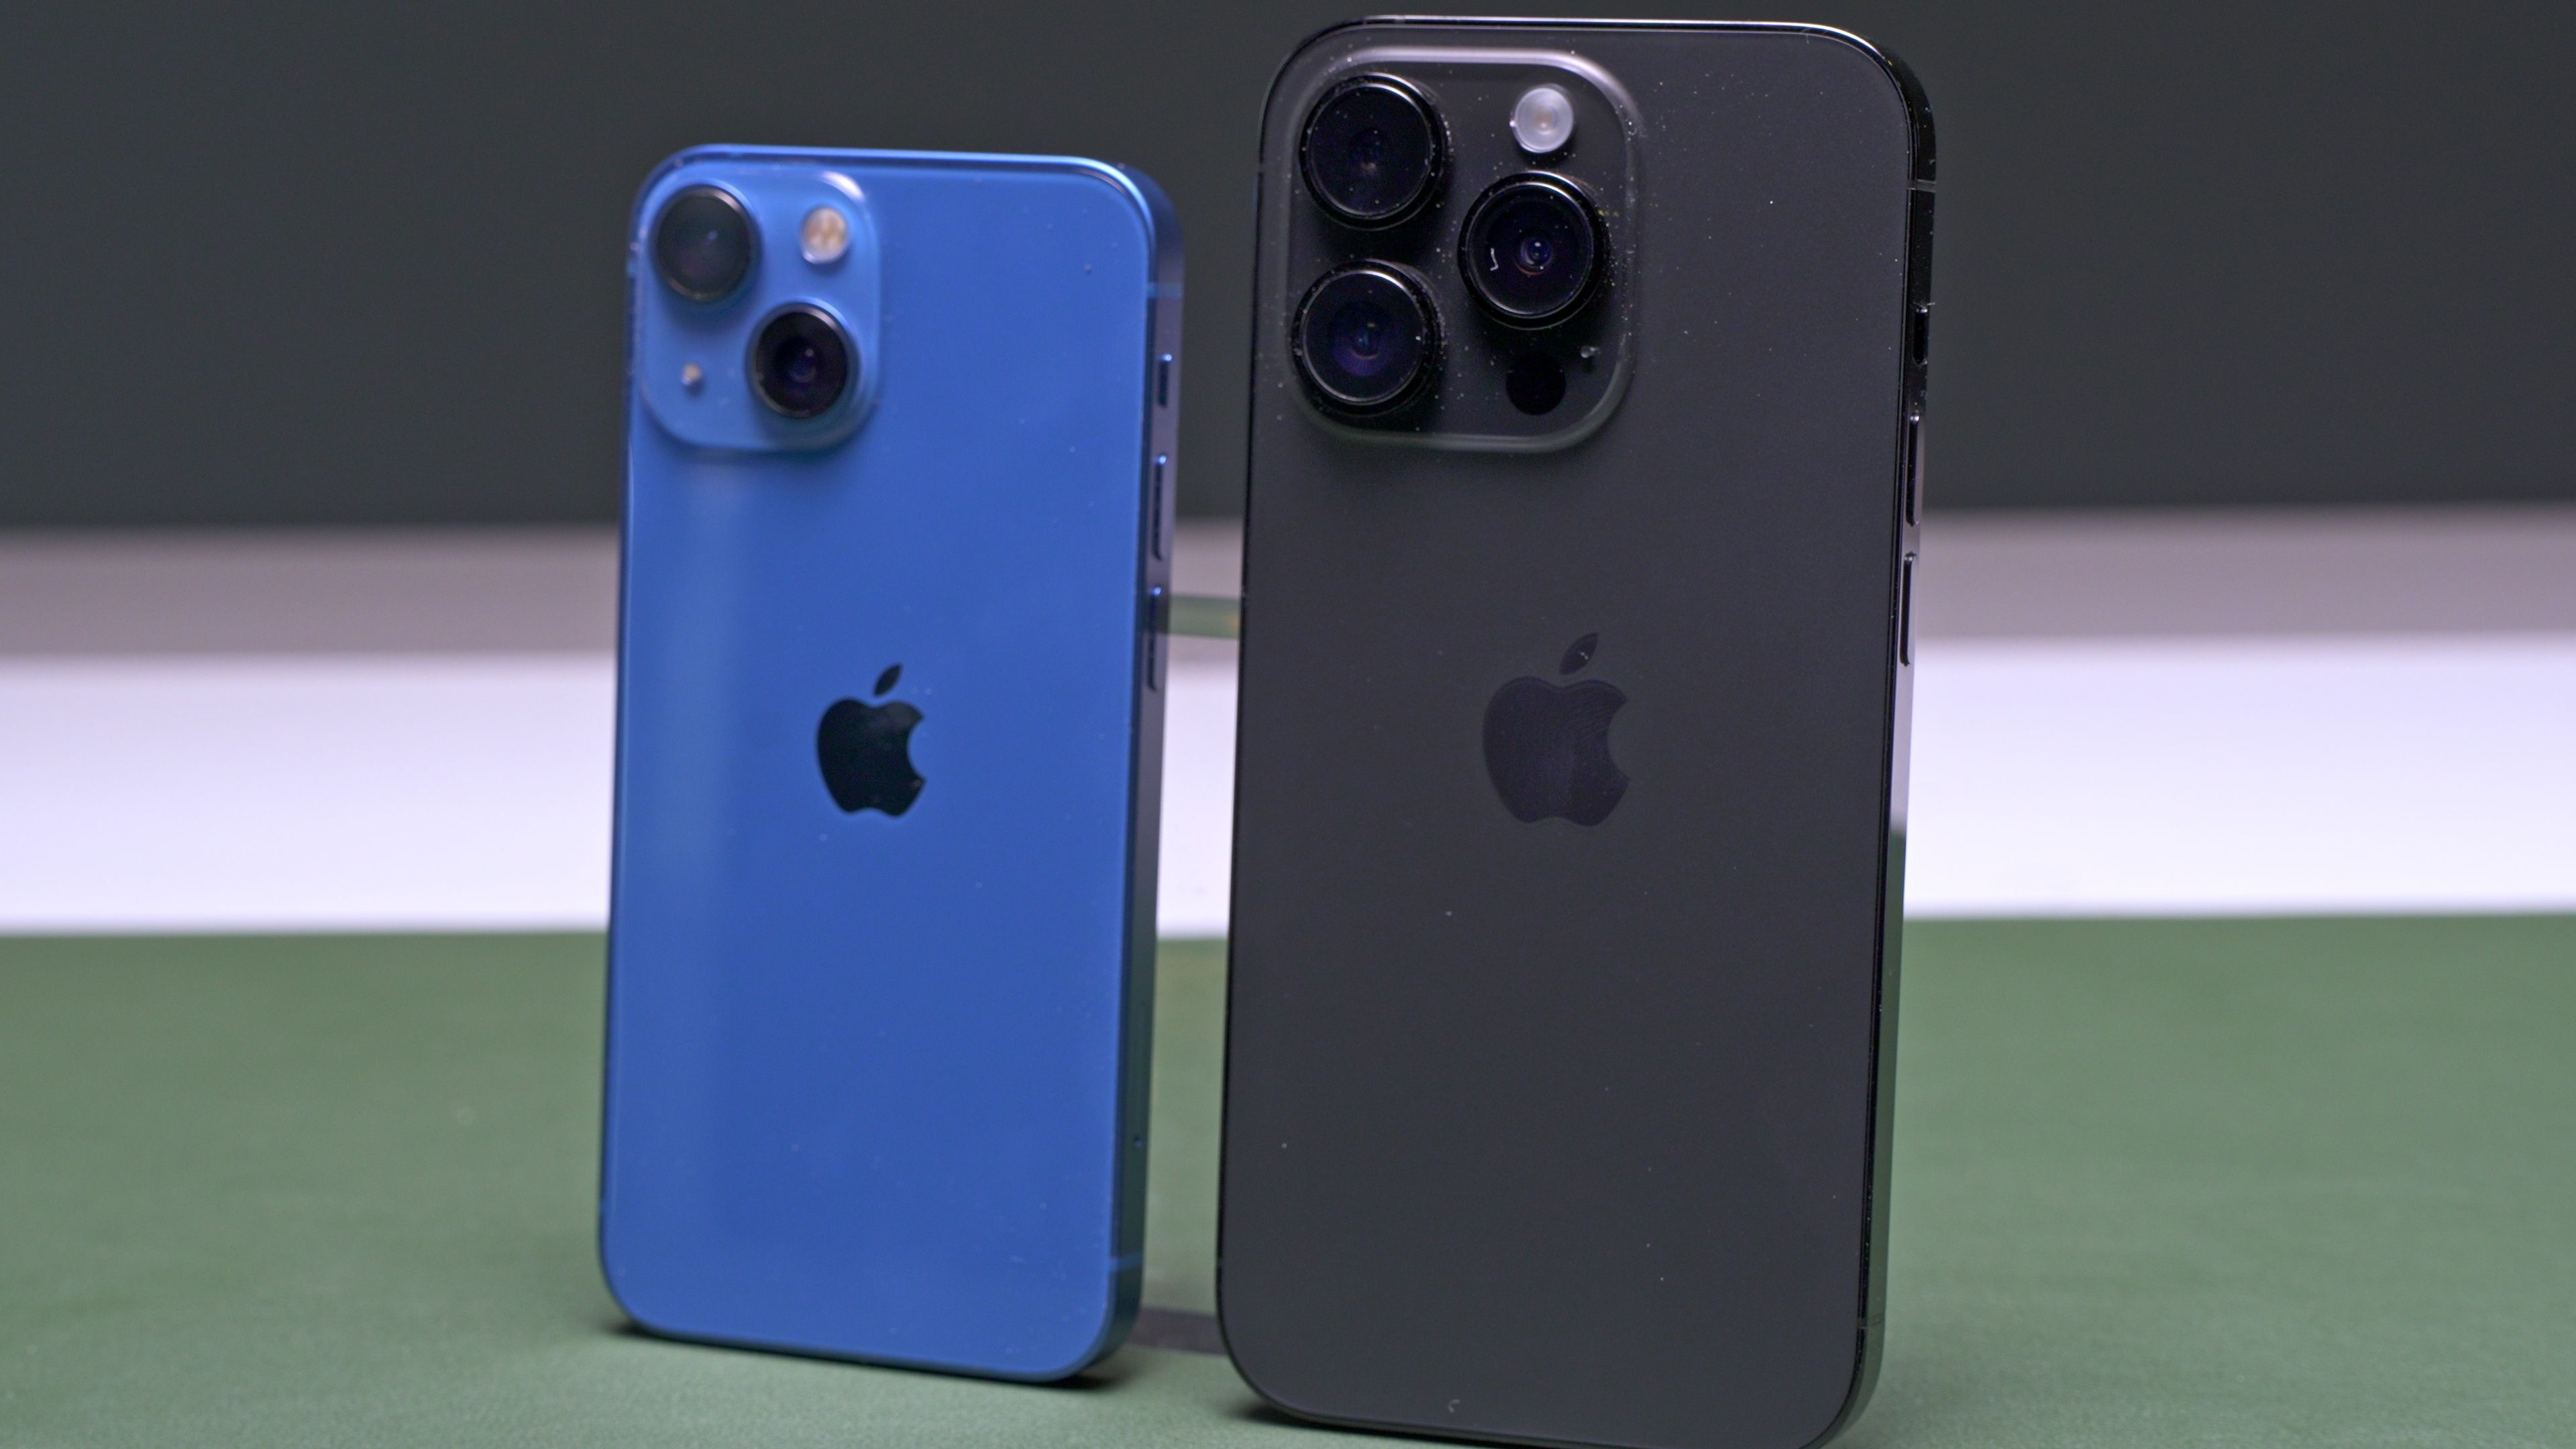 Back view next to iPhone 14 Pro - iPhone 13 Mini